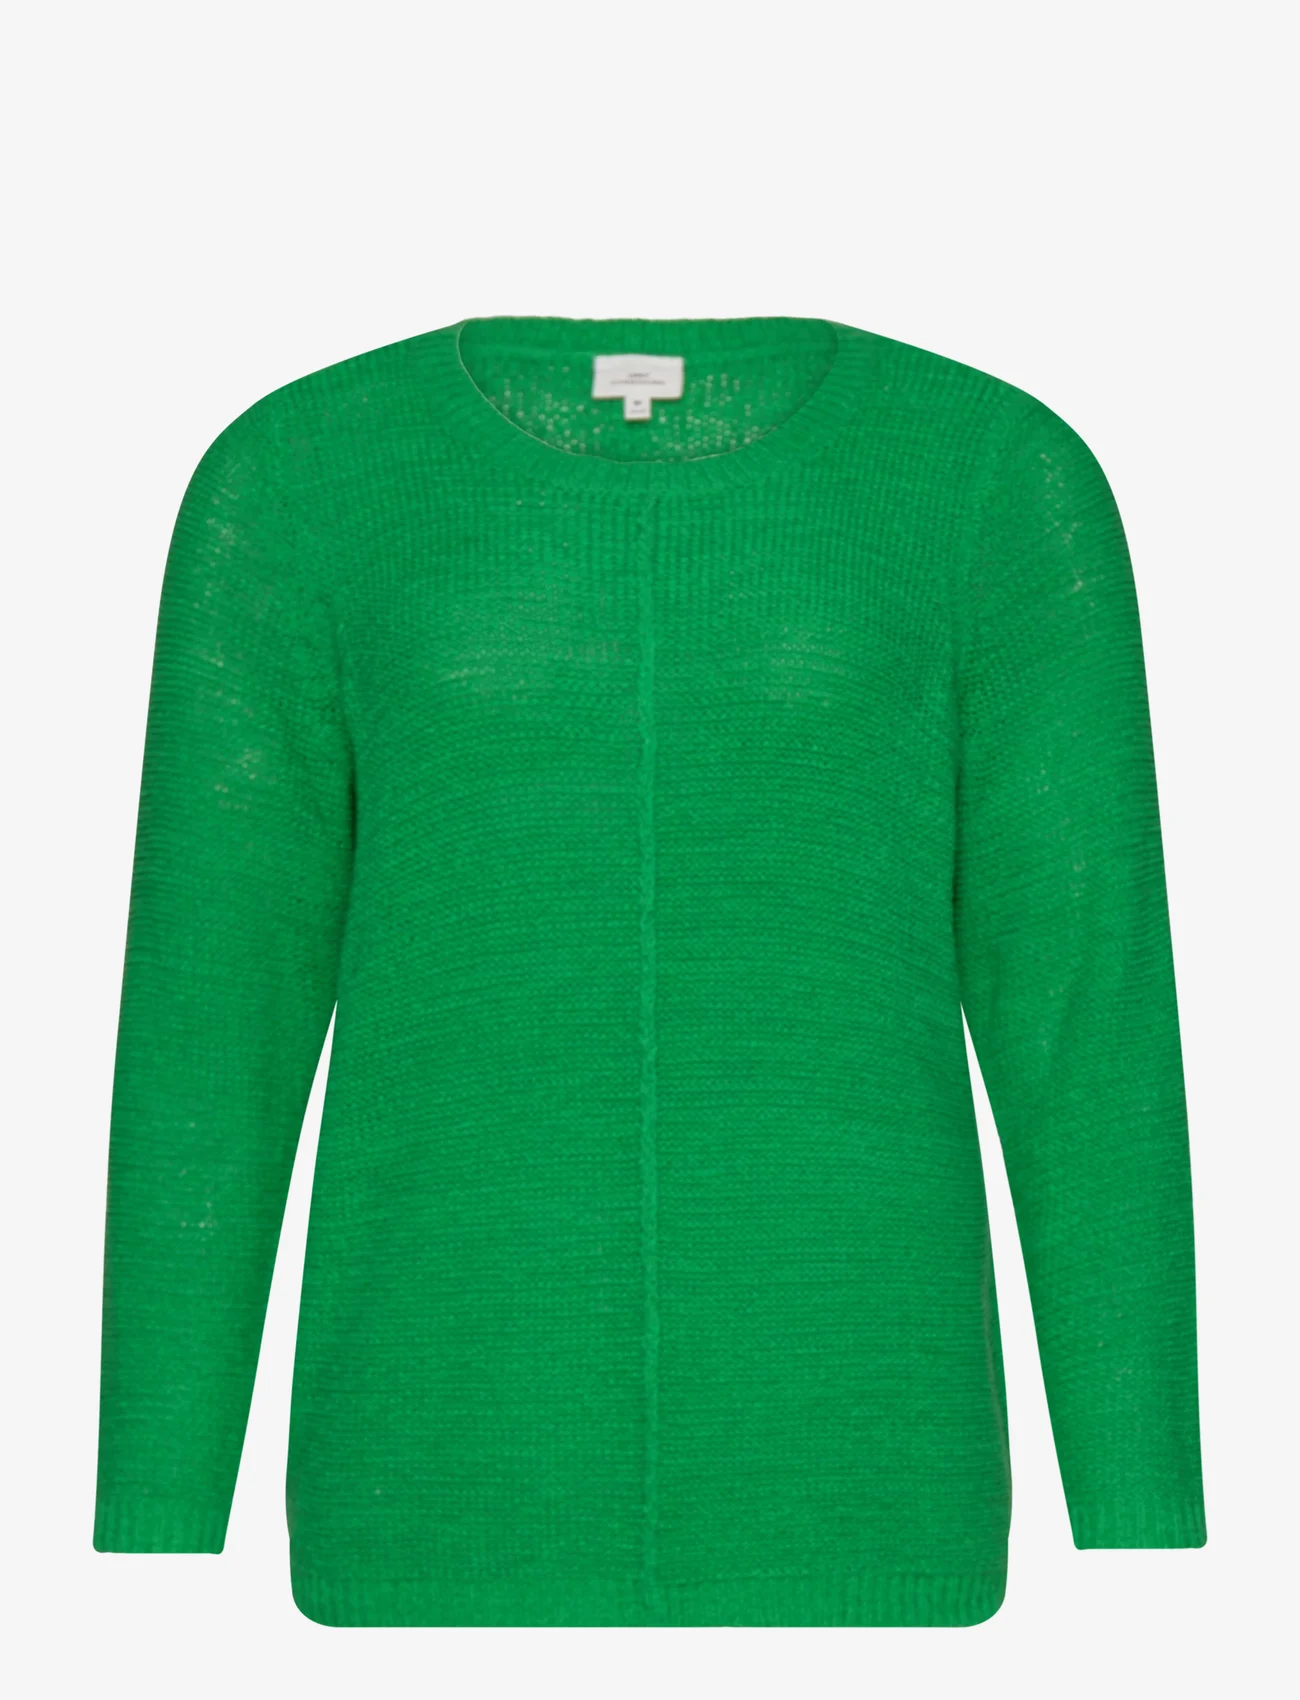 ONLY Carmakoma - CARNEW FOXY L/S PULLOVER KNT - laagste prijzen - green bee - 0